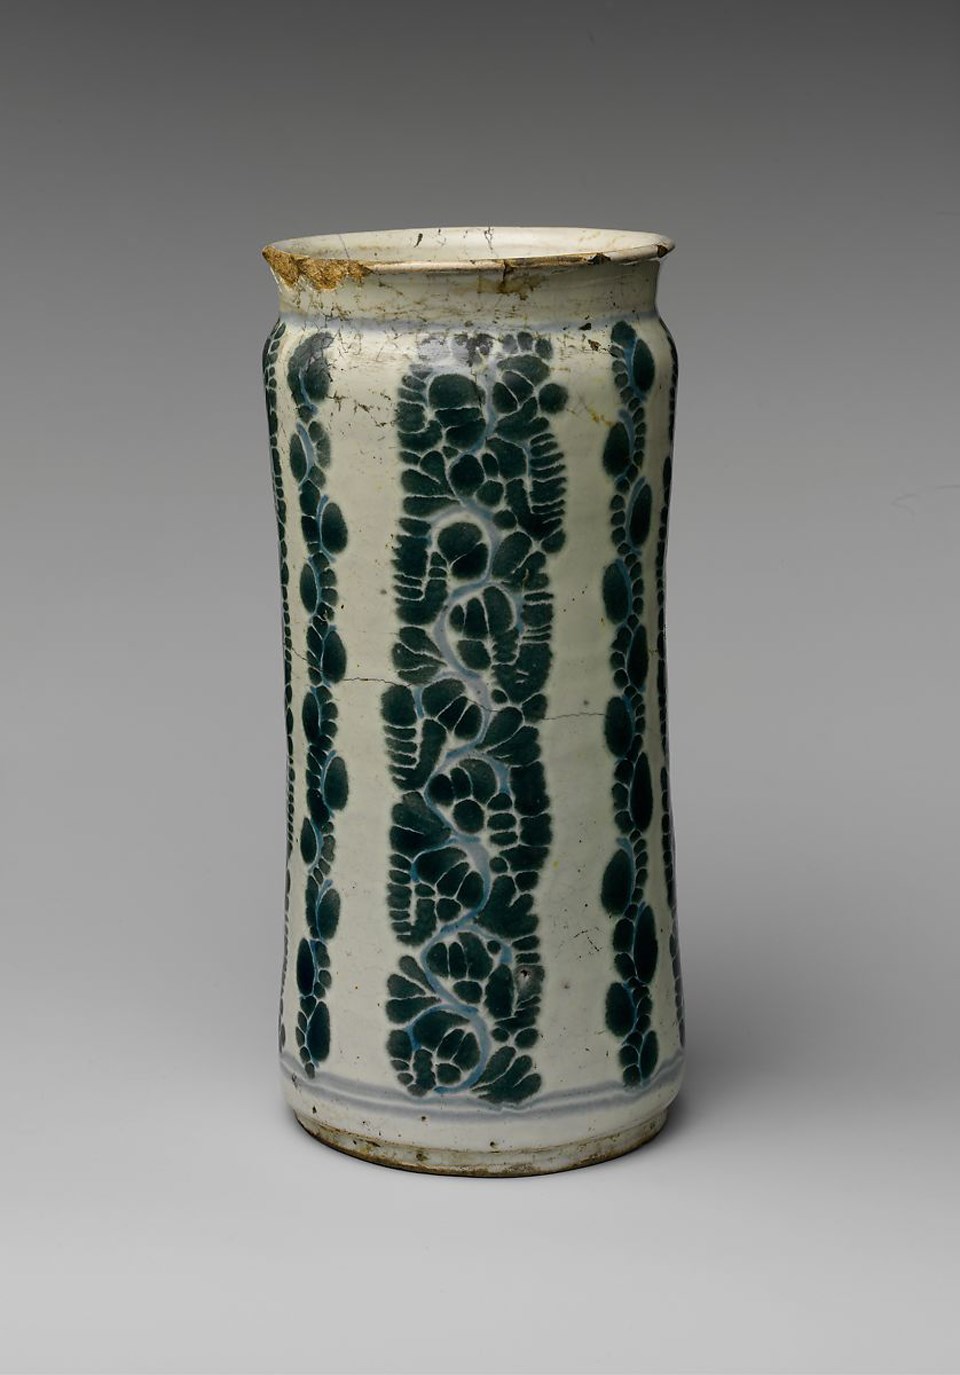 Small white apothecary jar with green scroll pattern. Circa 1800 from Mexico.